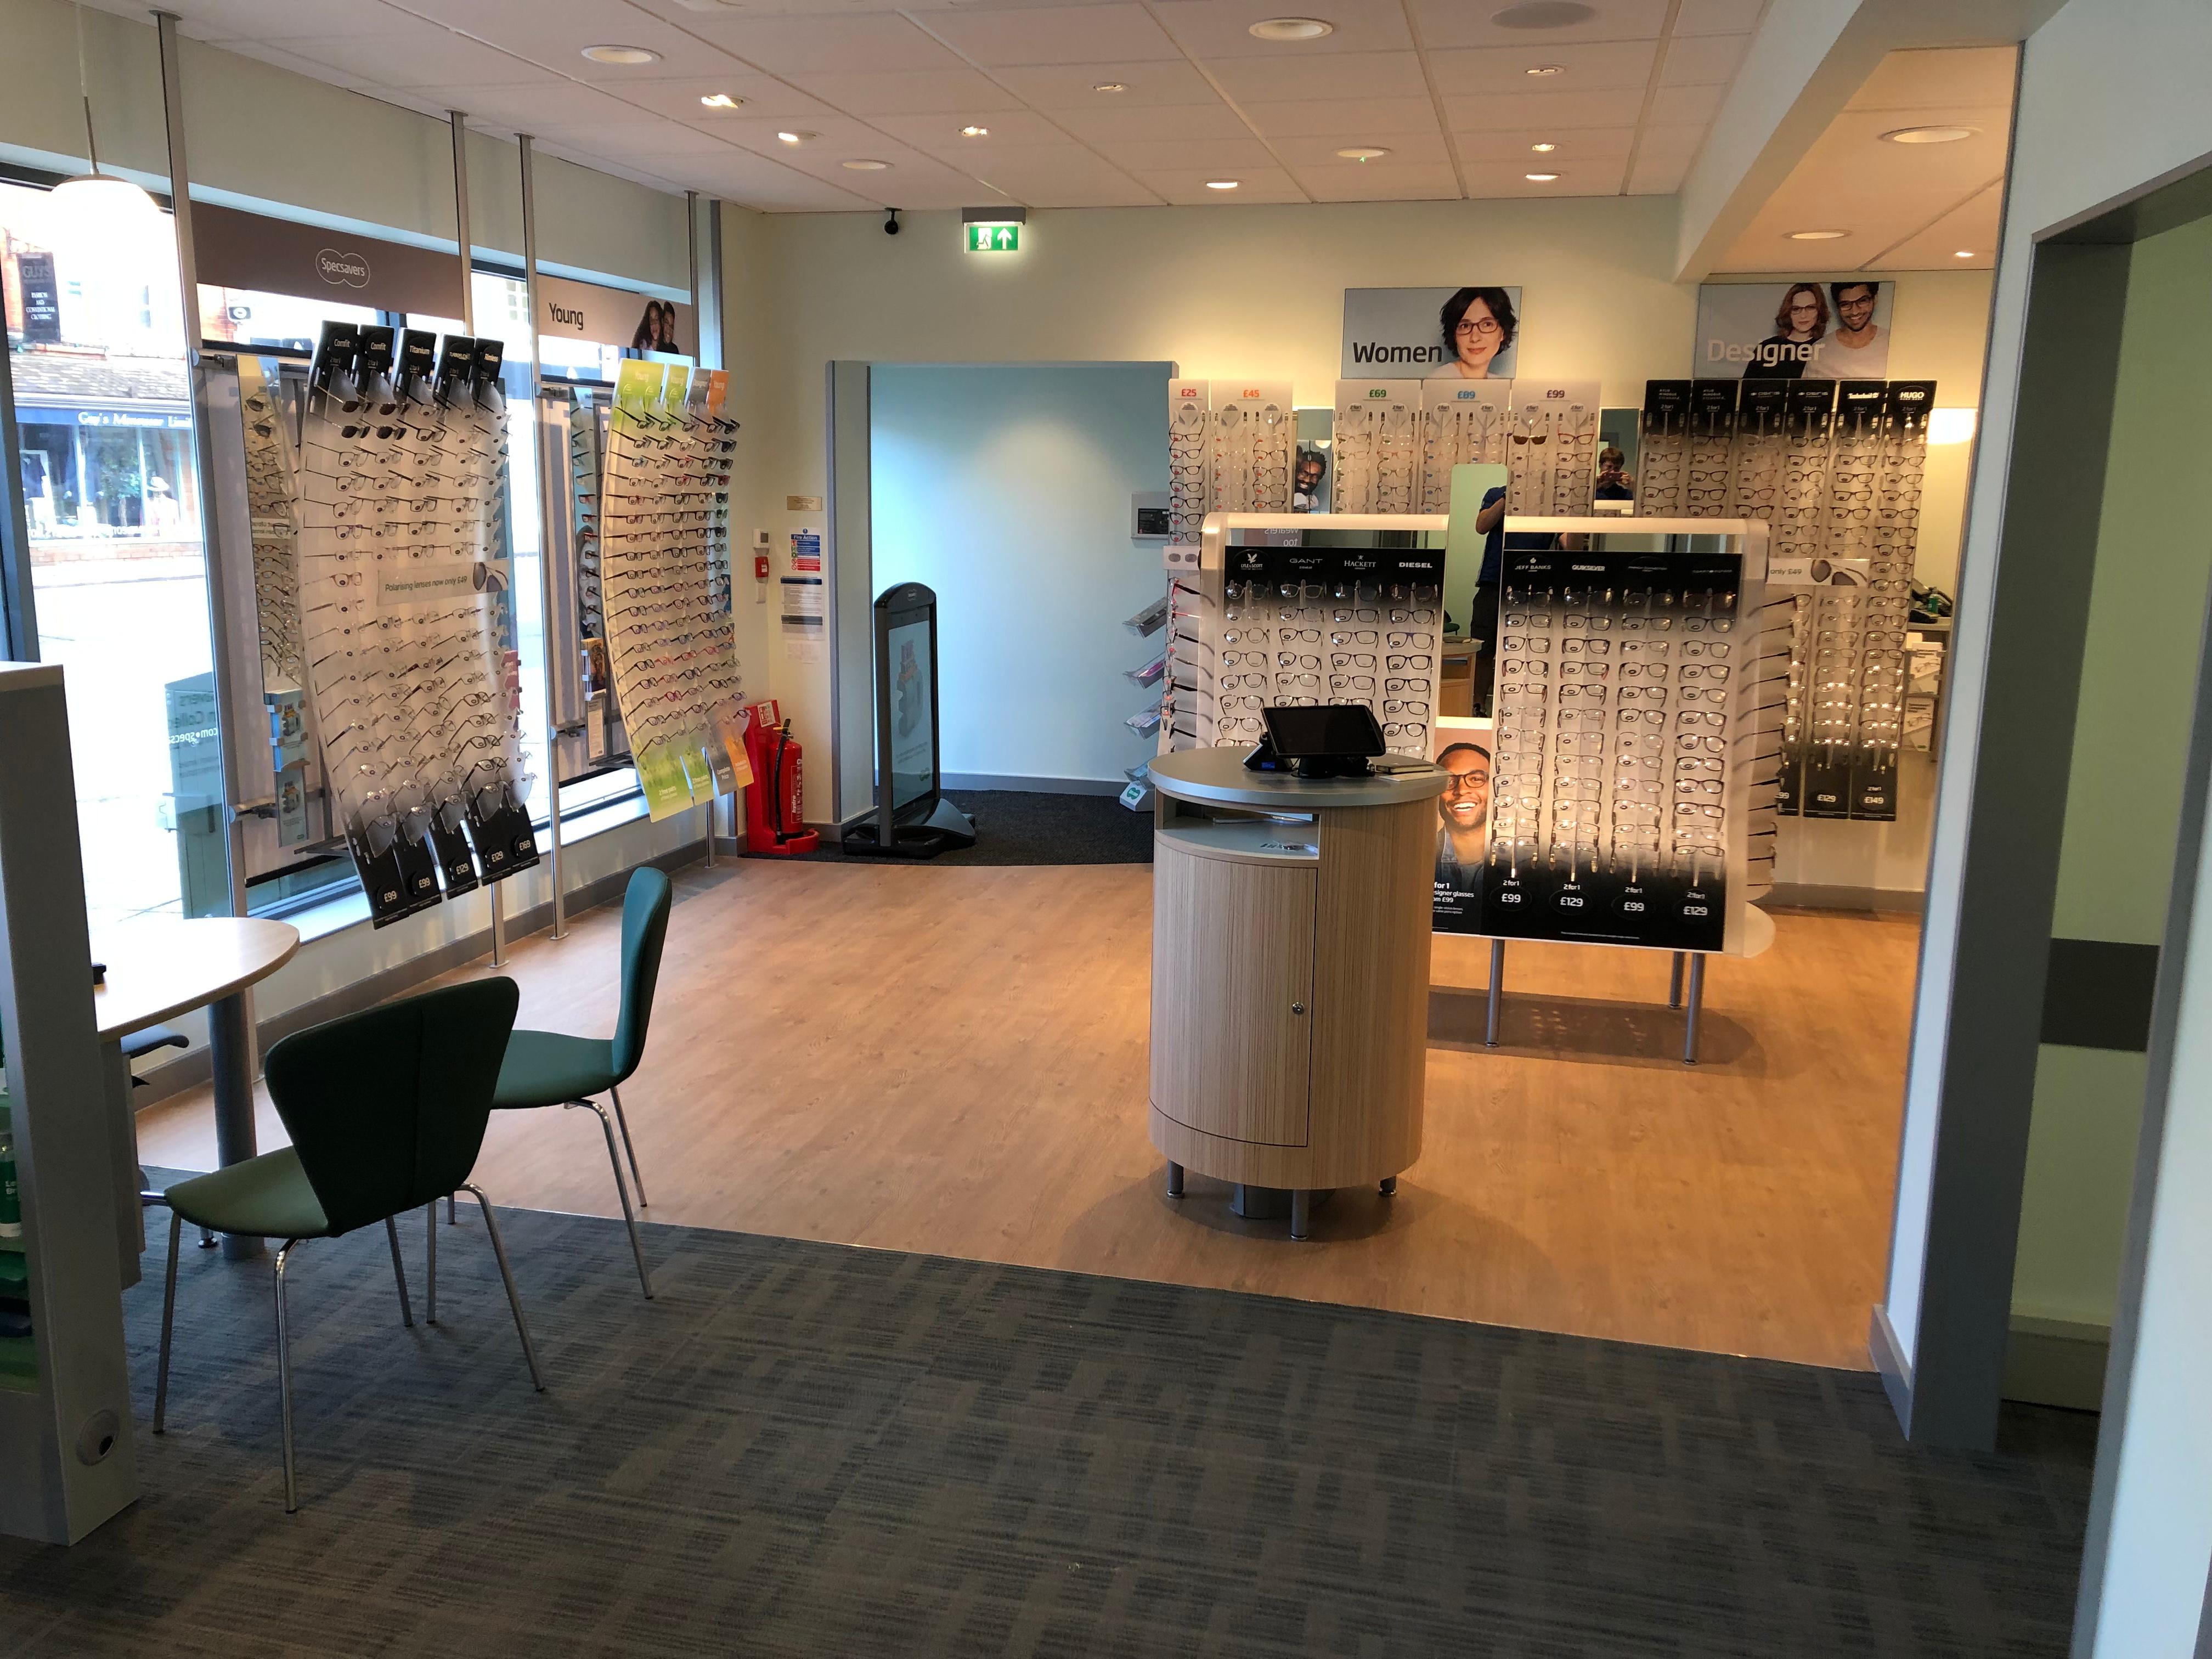 Images Specsavers Opticians and Audiologists - Alcester